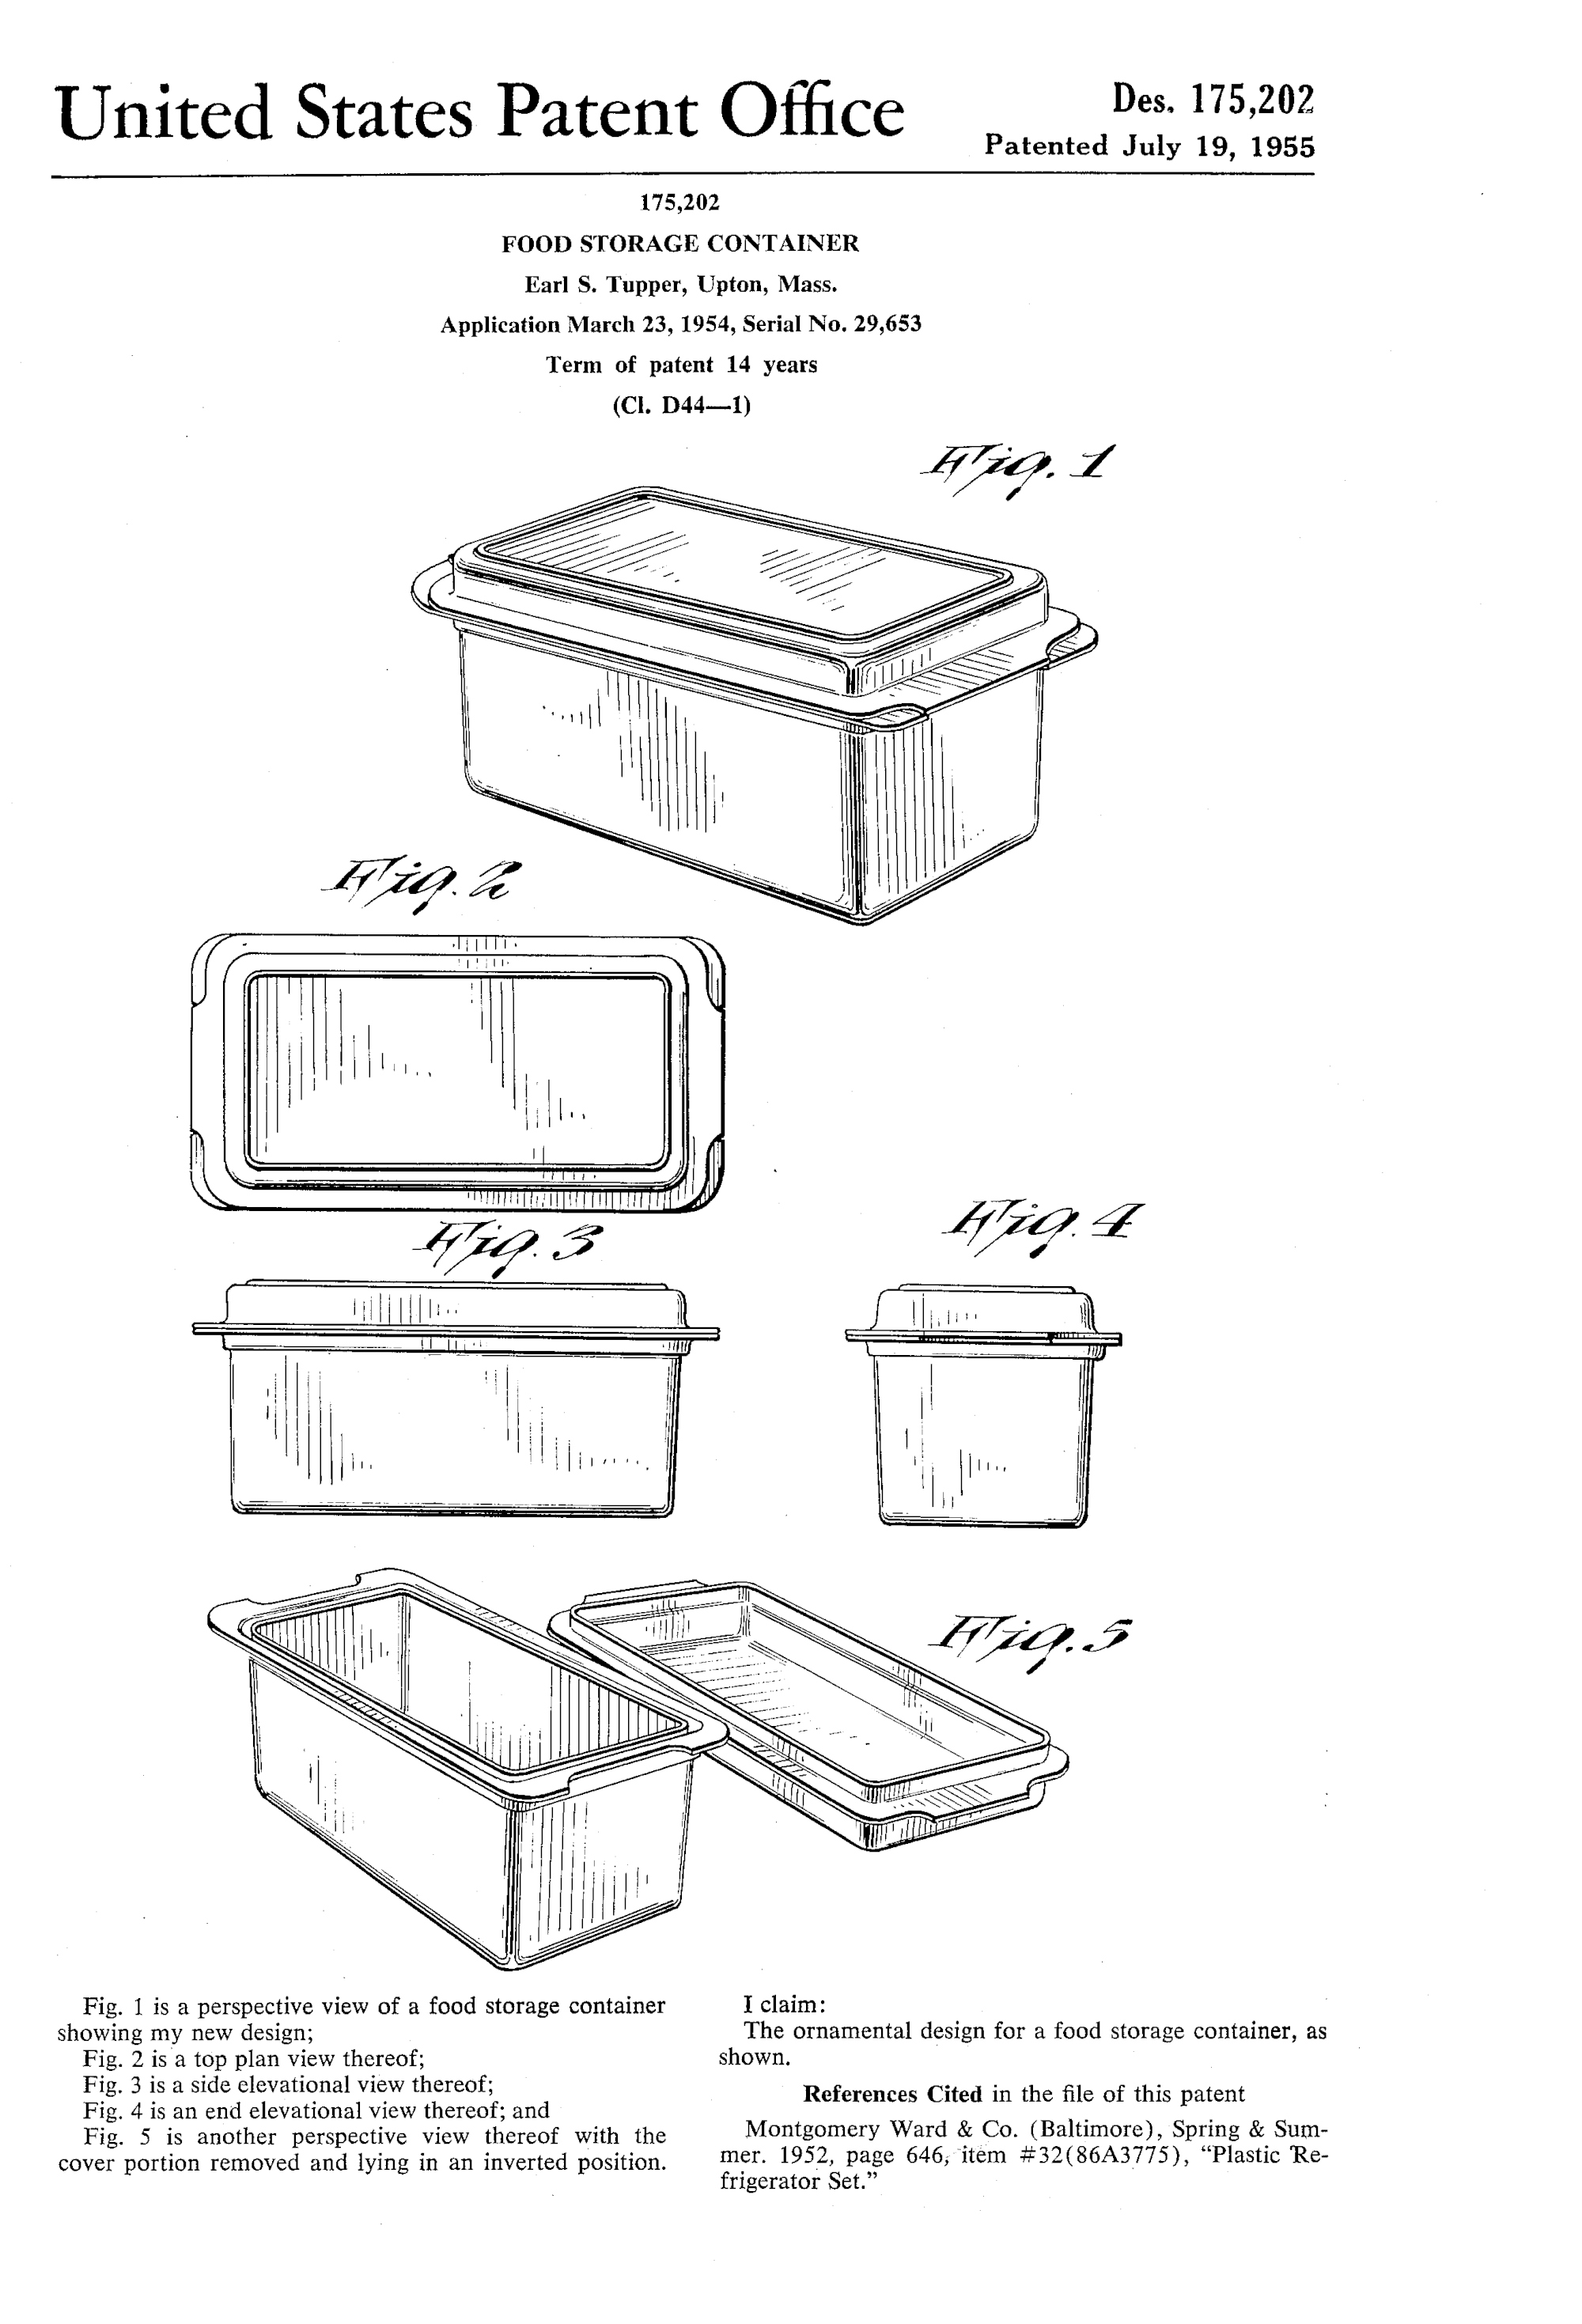 Food Storage Container, Earl S. Tupper, 1954/1955. Patent Number: USD 175,202, U.S. Patent Office